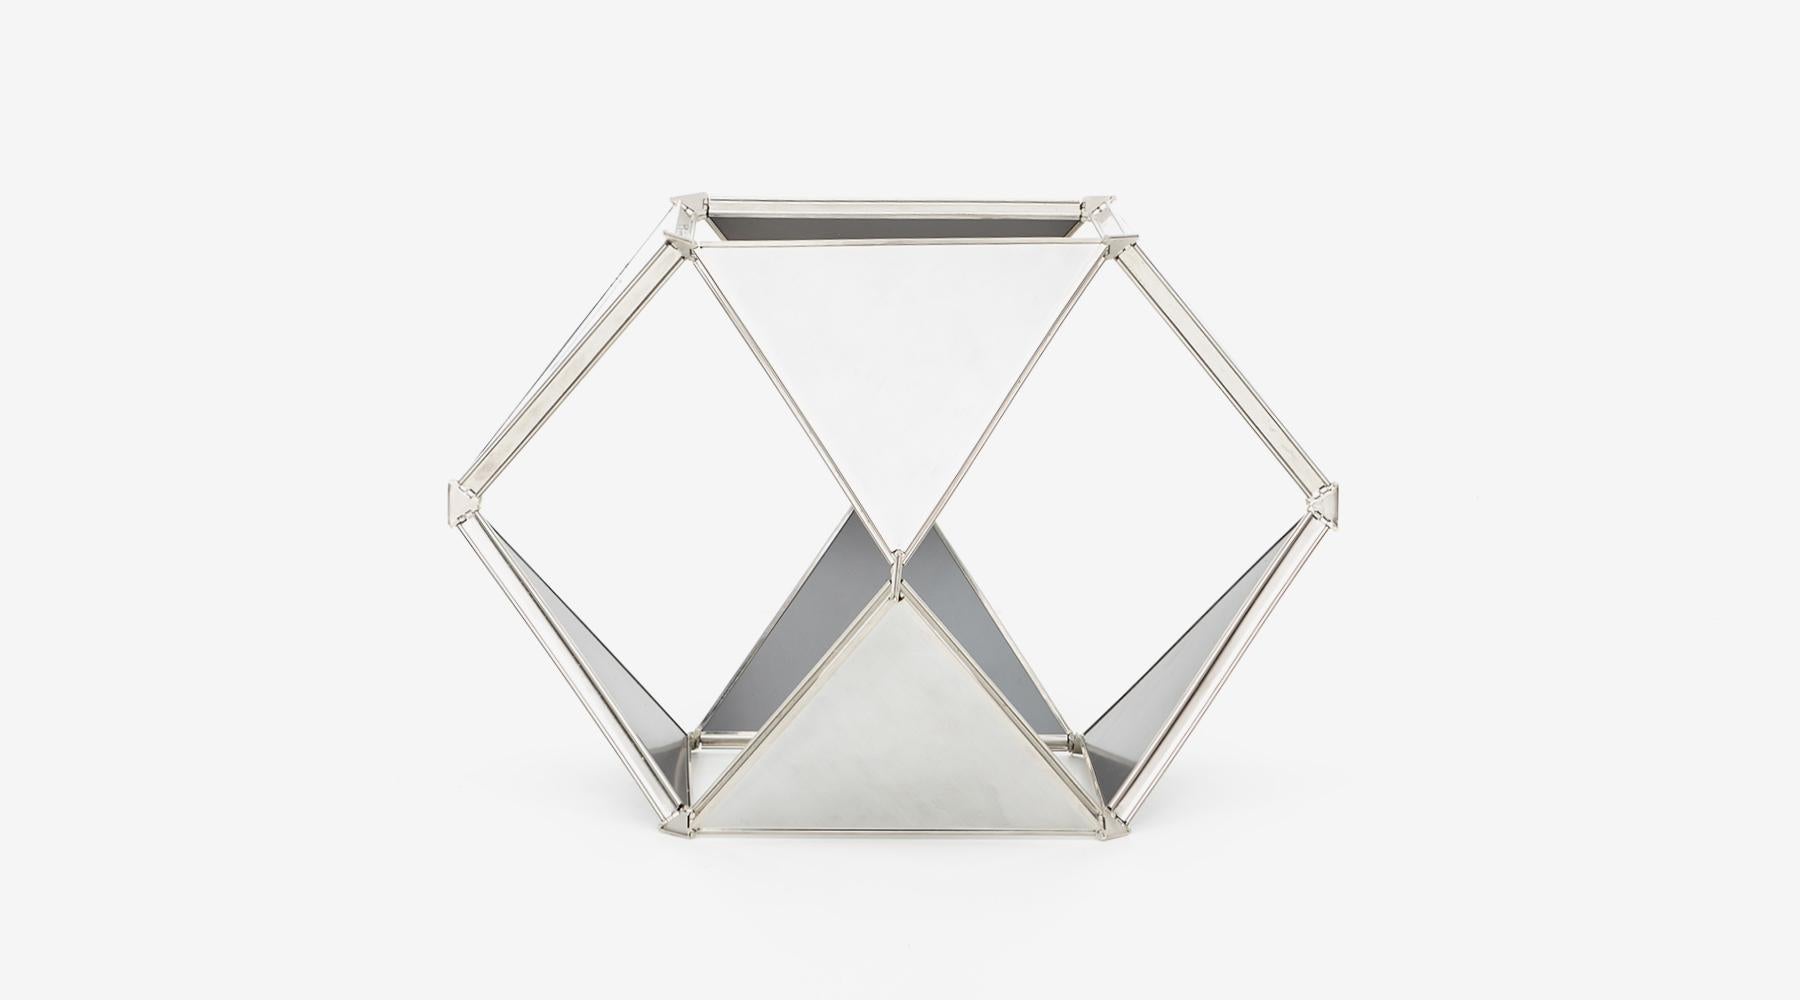 Aluminum sculpture by Buckminster Fuller, USA, 1976.

Signed Buckminster Fuller aluminum sculpture. Kinetic sculpture that compresses and expands. Signed to one panel on side. Buckminster Fuller (1895-1983) was an American architect and engineer